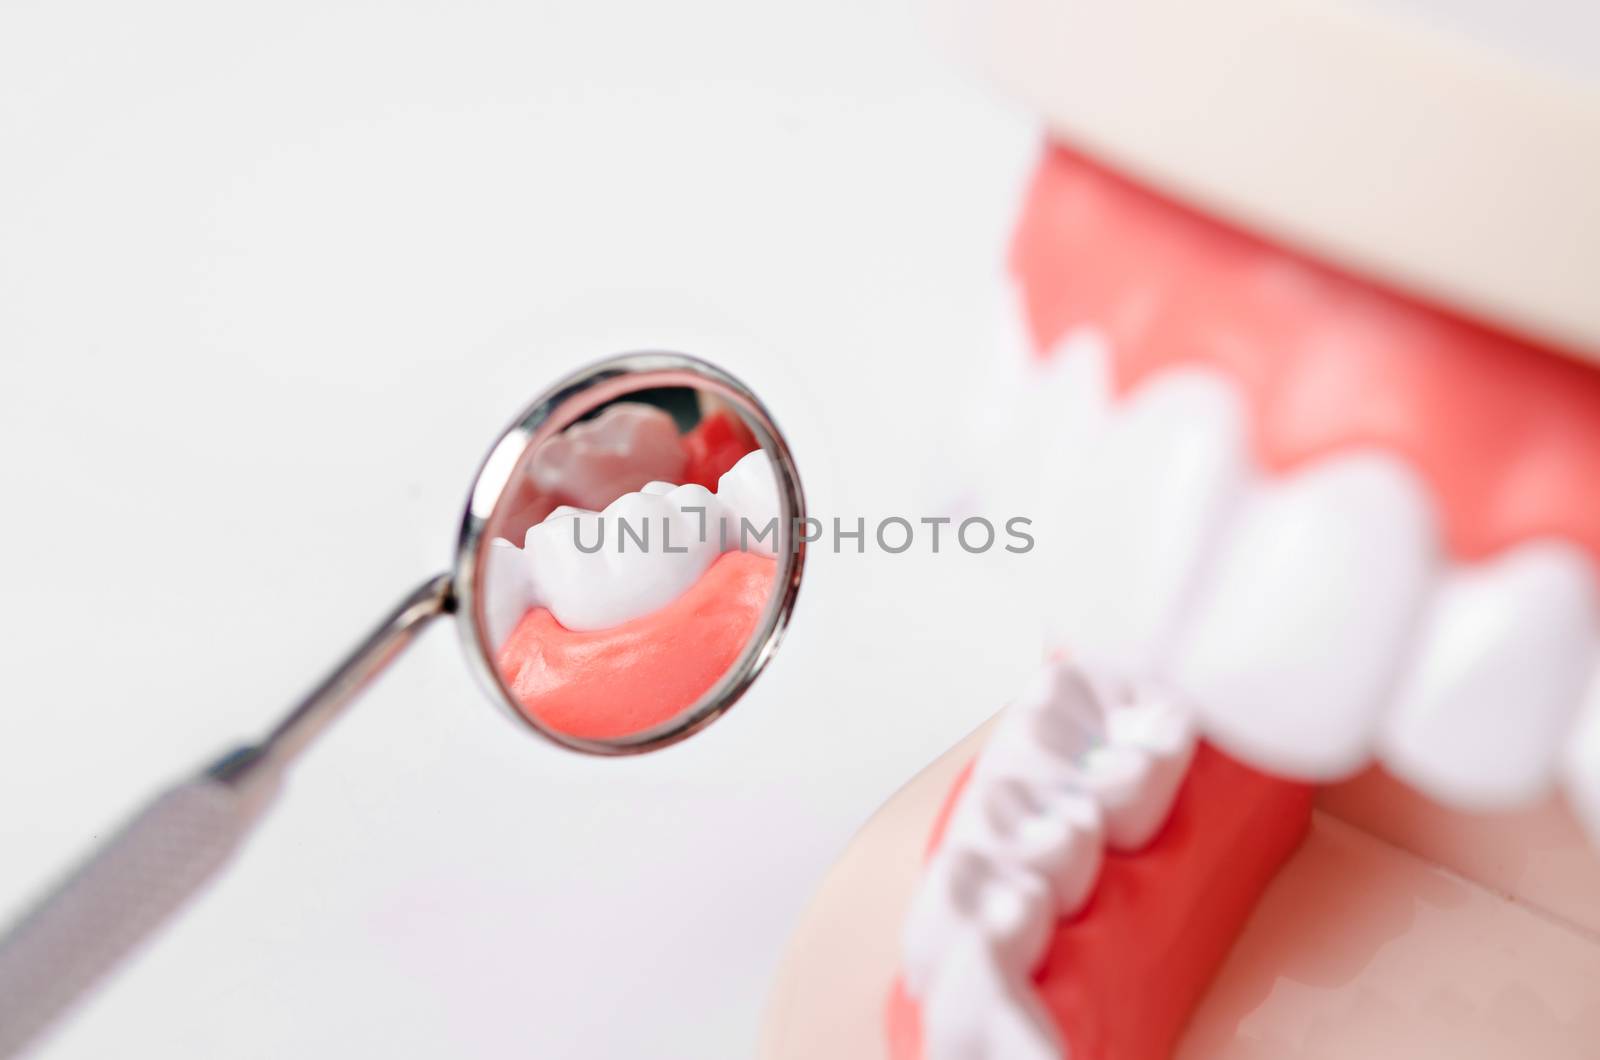 White teeth and dental instruments on white background.